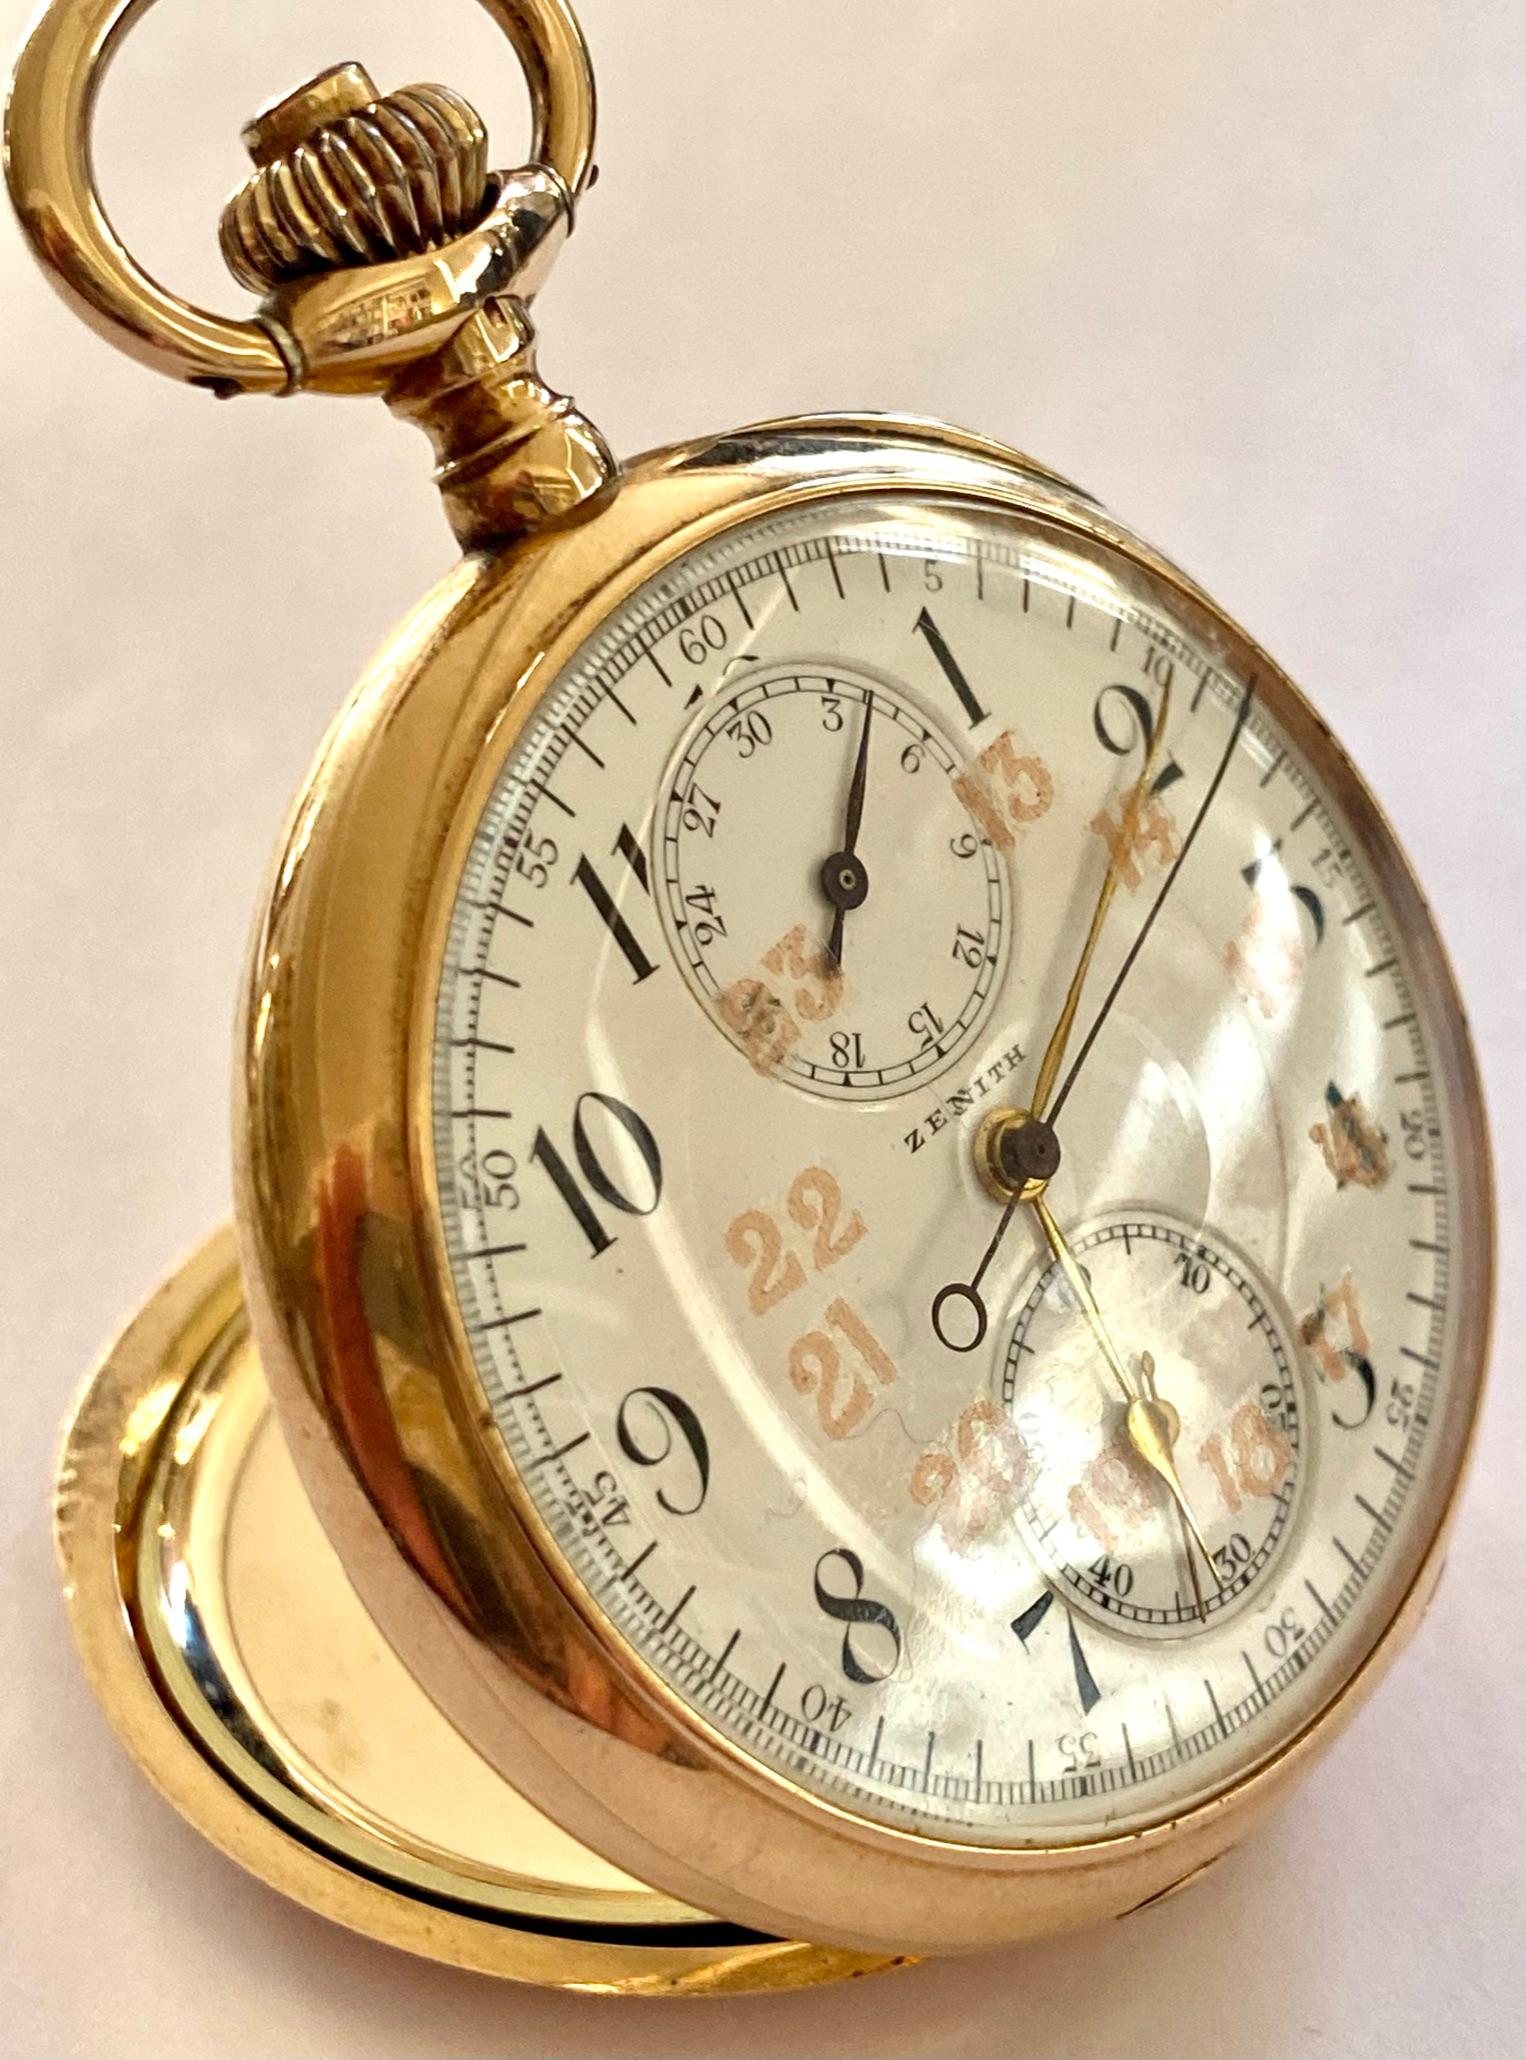 One (1) 14K. Yellow gold pocket watch
brand: Zenith
Function: time, second hand and 30 minute chronograph
size: diameter: 50 mm. thickness: 13 mm
Weight: 83.21 grams
Case no : 186431 movement no: 2358914
Made around 1930
Comes with the original box